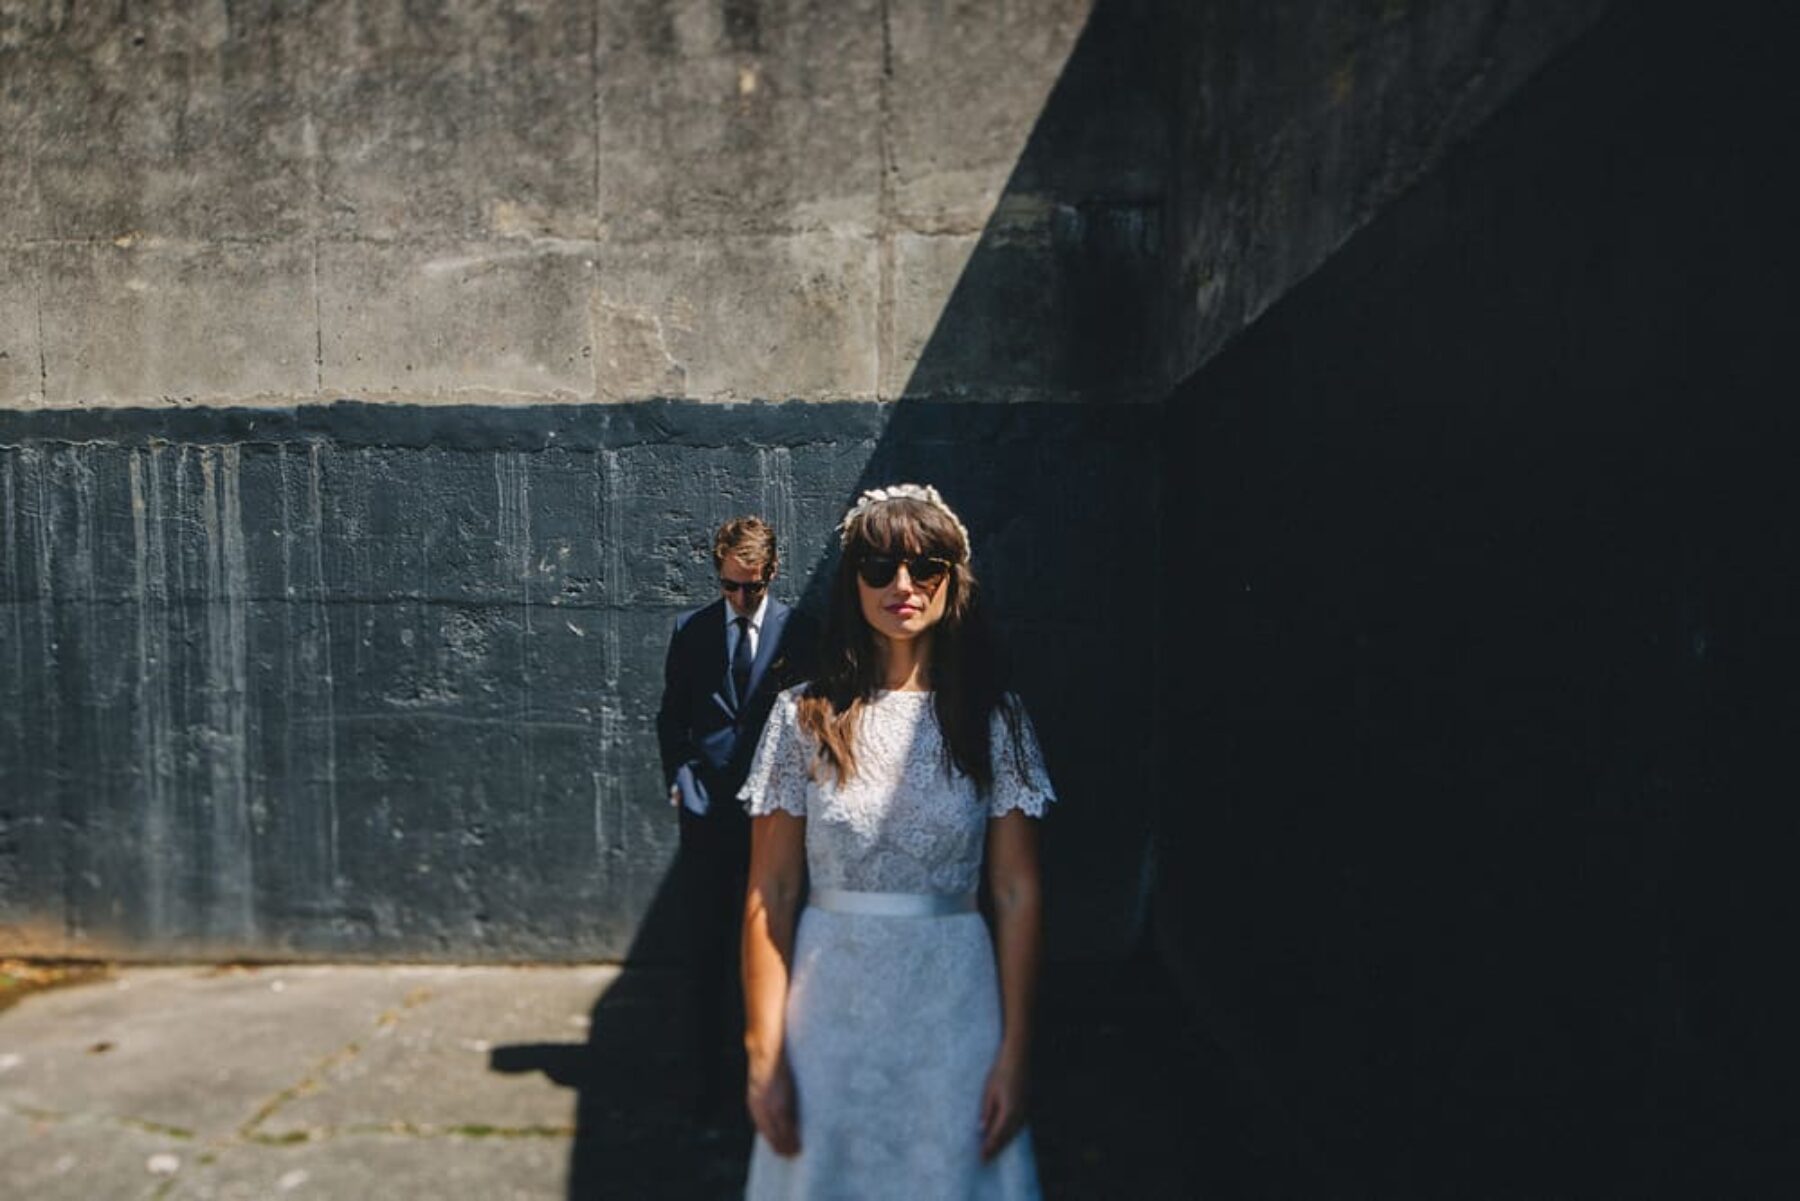 Auckland wedding - photography by Bayly & Moore